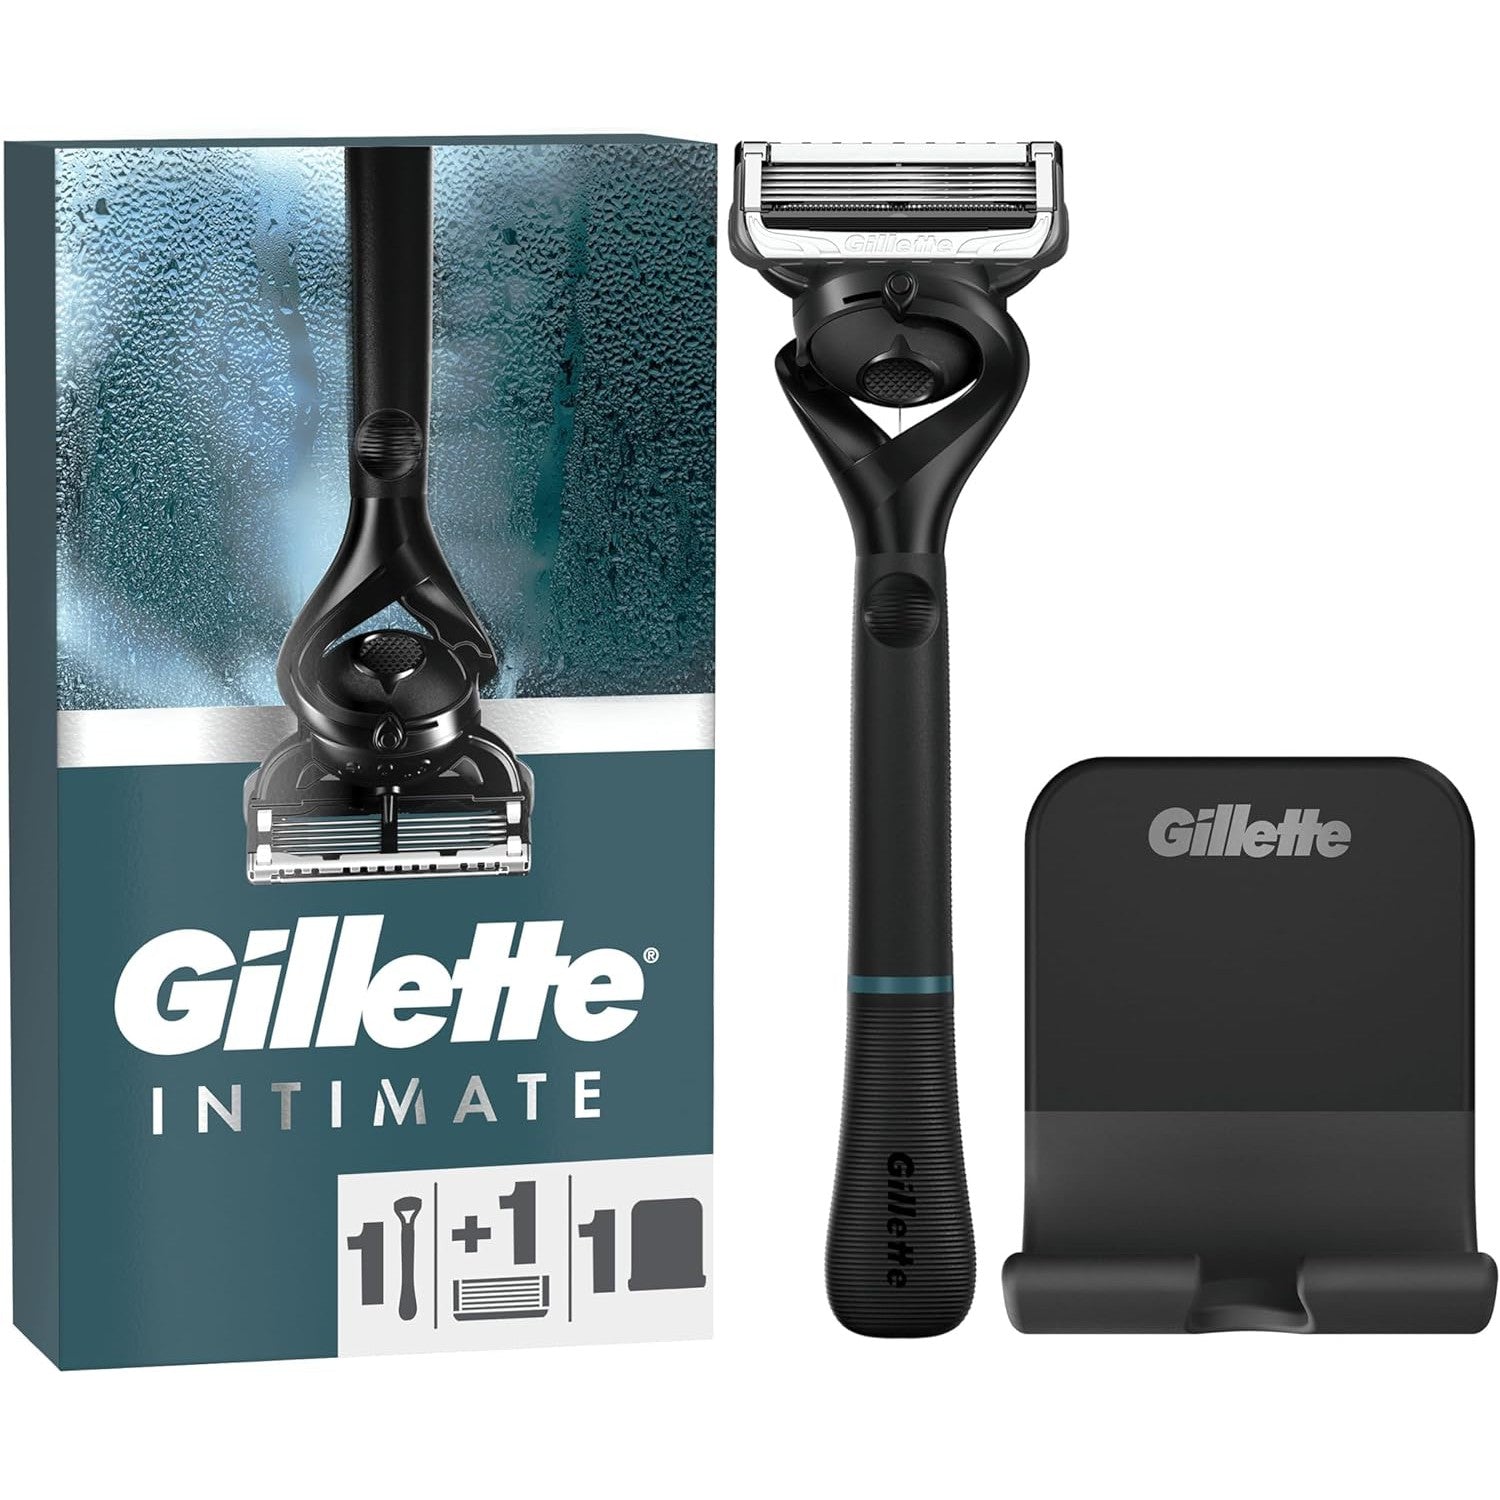 Gillette Intimate Razor for Men, Razor for Pubic Hair, Gentle and Easy to Use, 1 Handle + 1 Razor Blade Refill